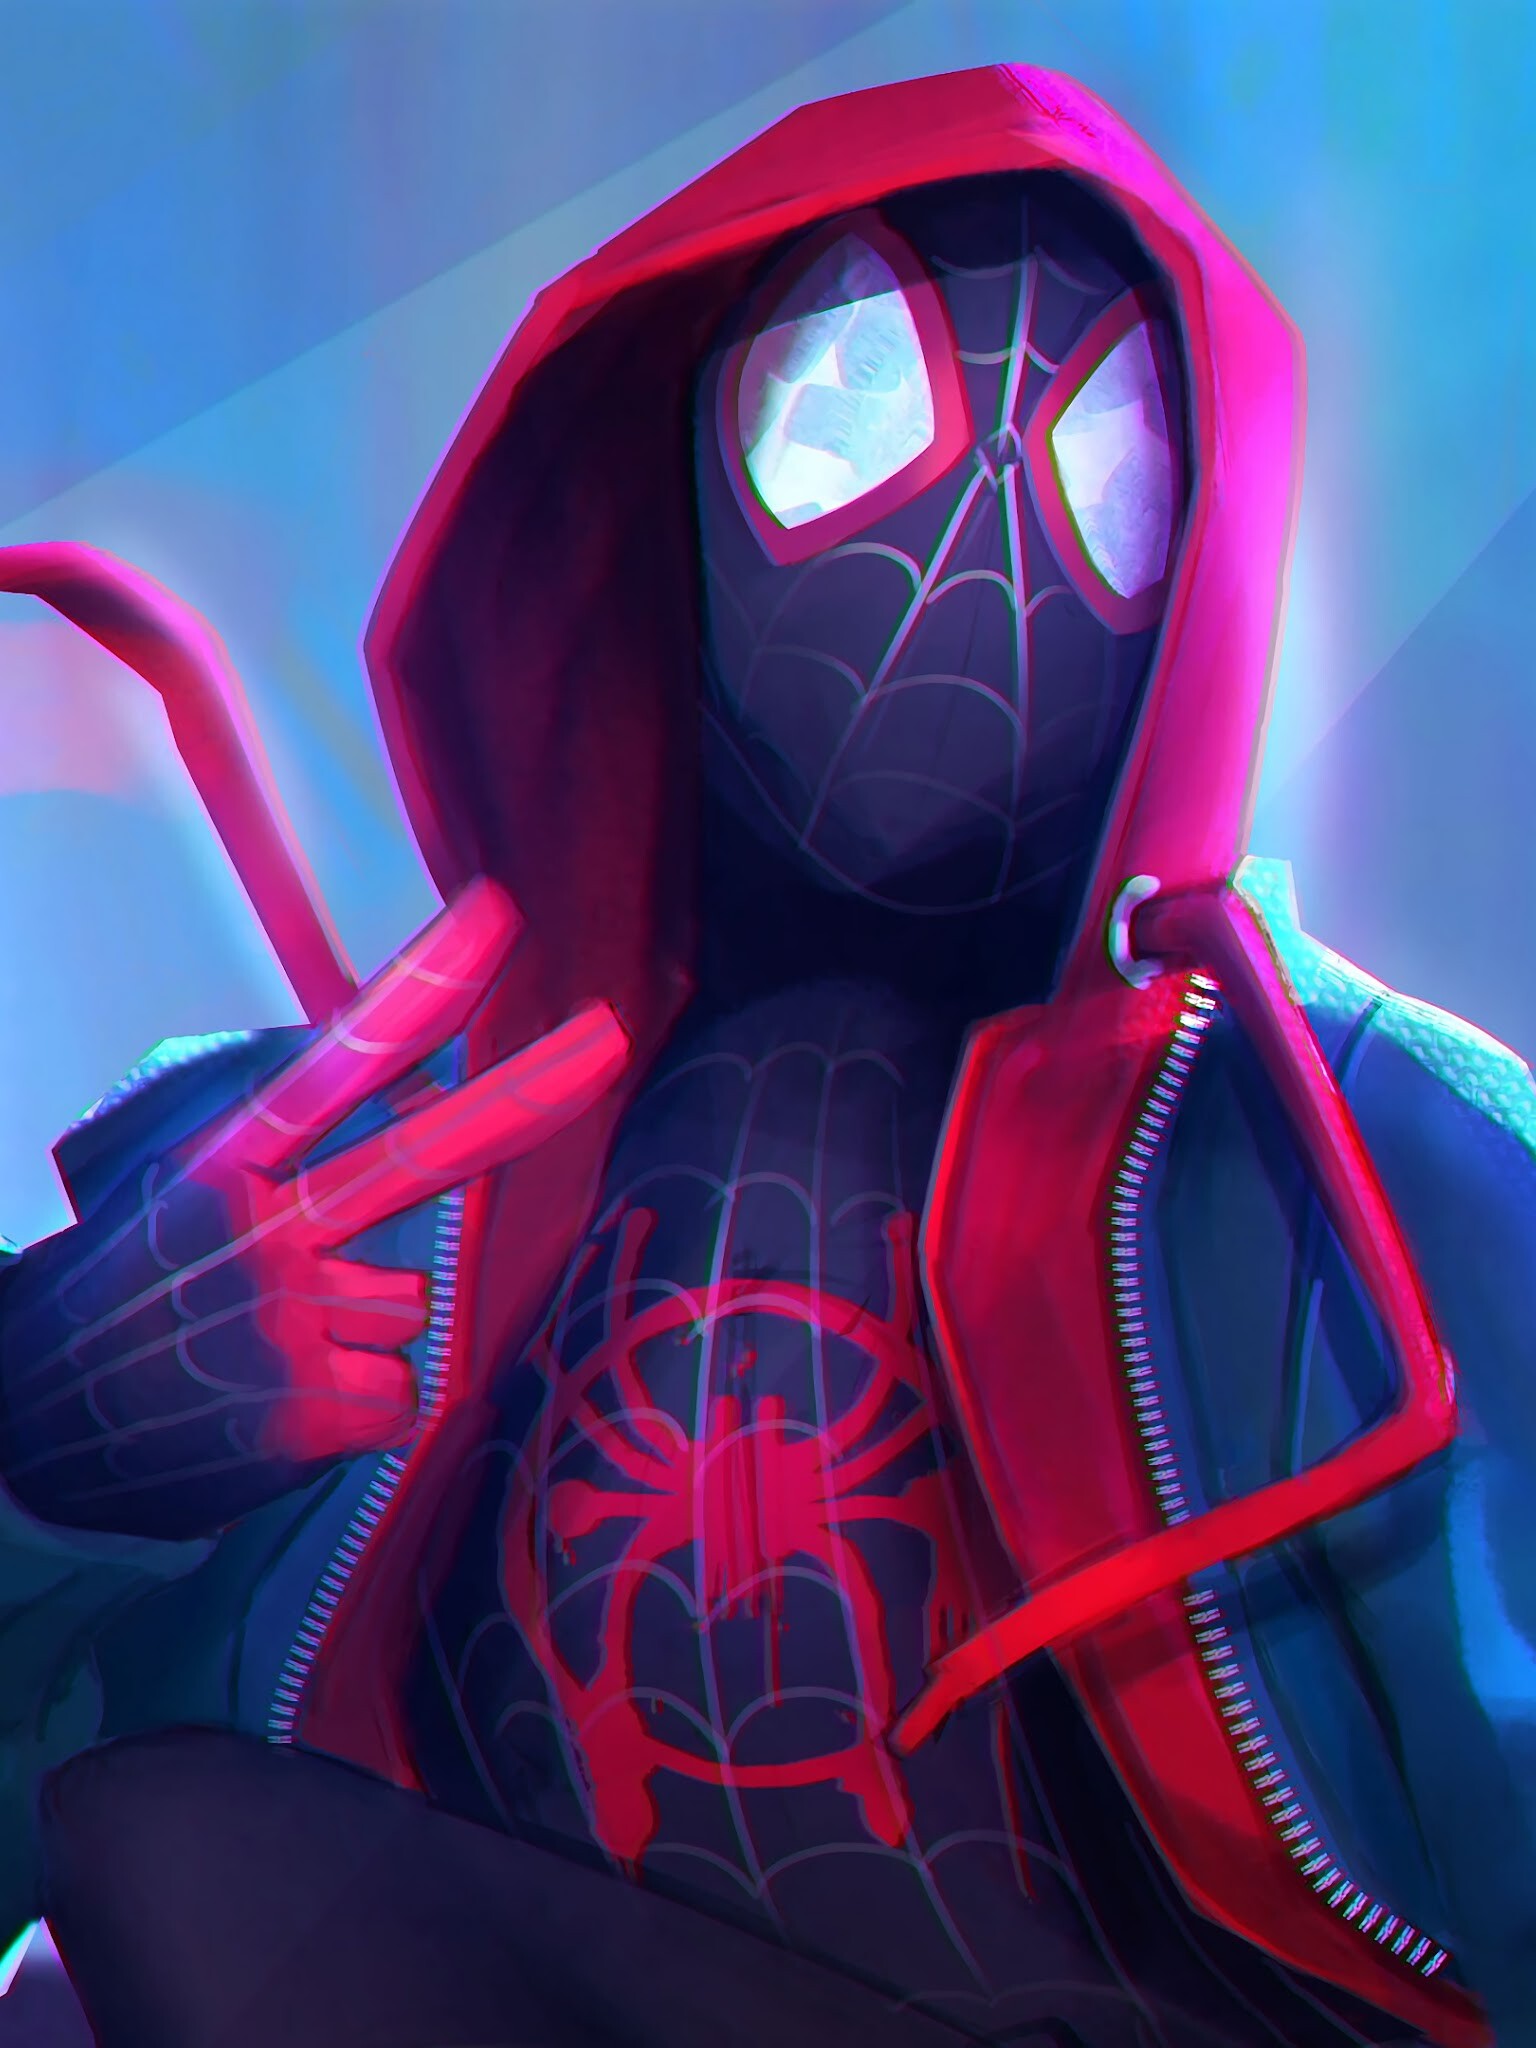 Spider-Man: Into the Spider-Verse: Miles Morales, An American animated superhero film. 1540x2050 HD Wallpaper.